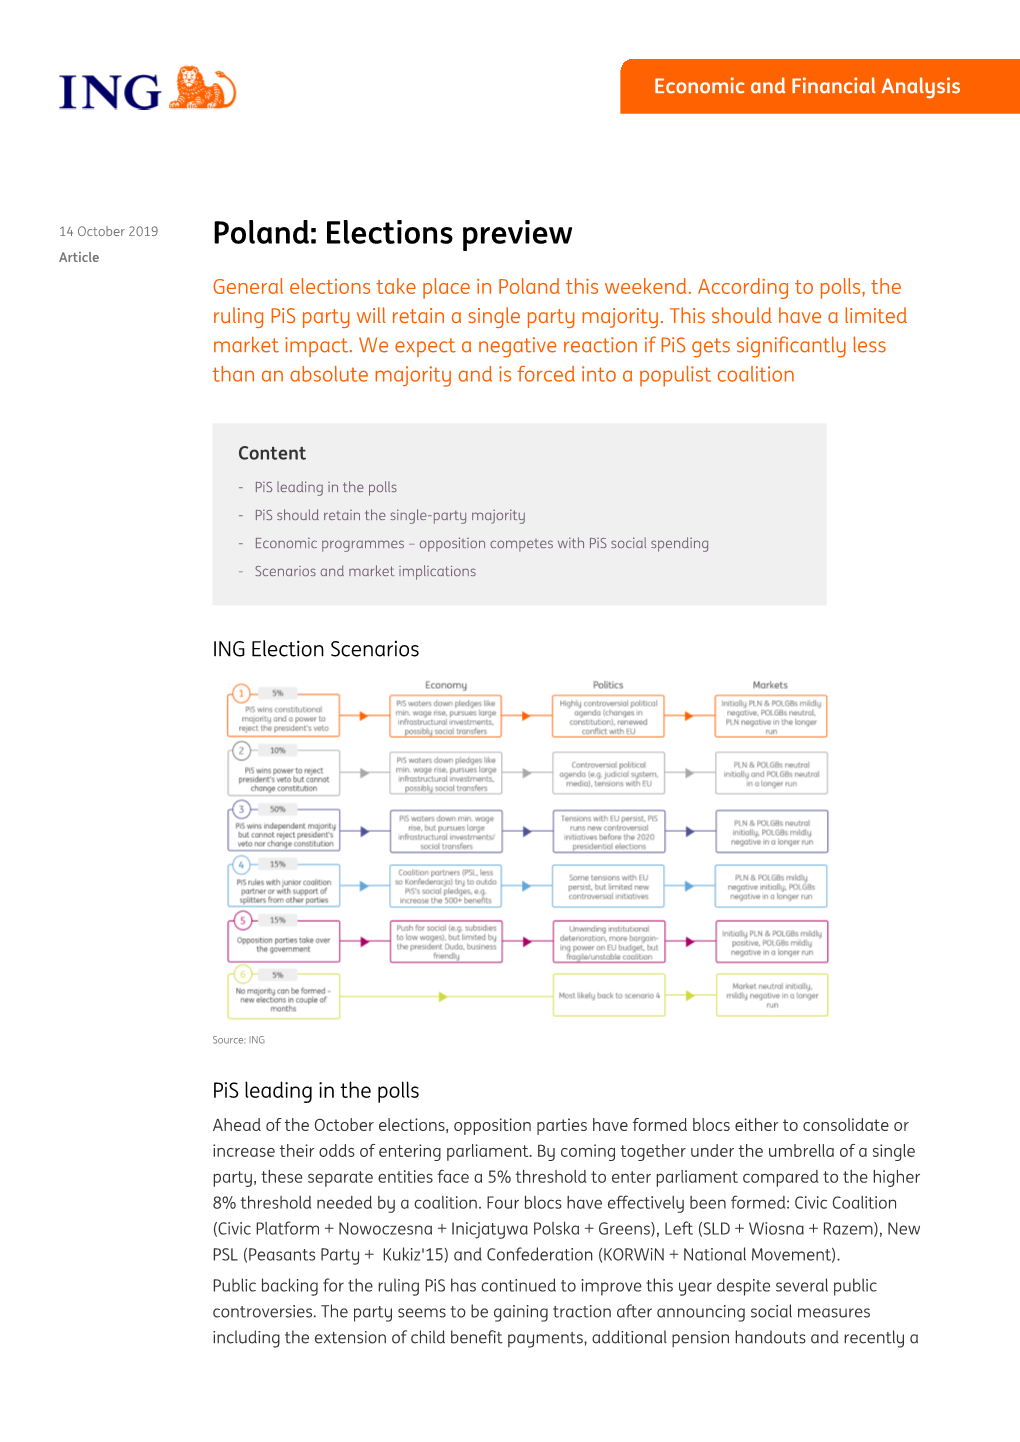 Poland: Elections Preview Article General Elections Take Place in Poland This Weekend